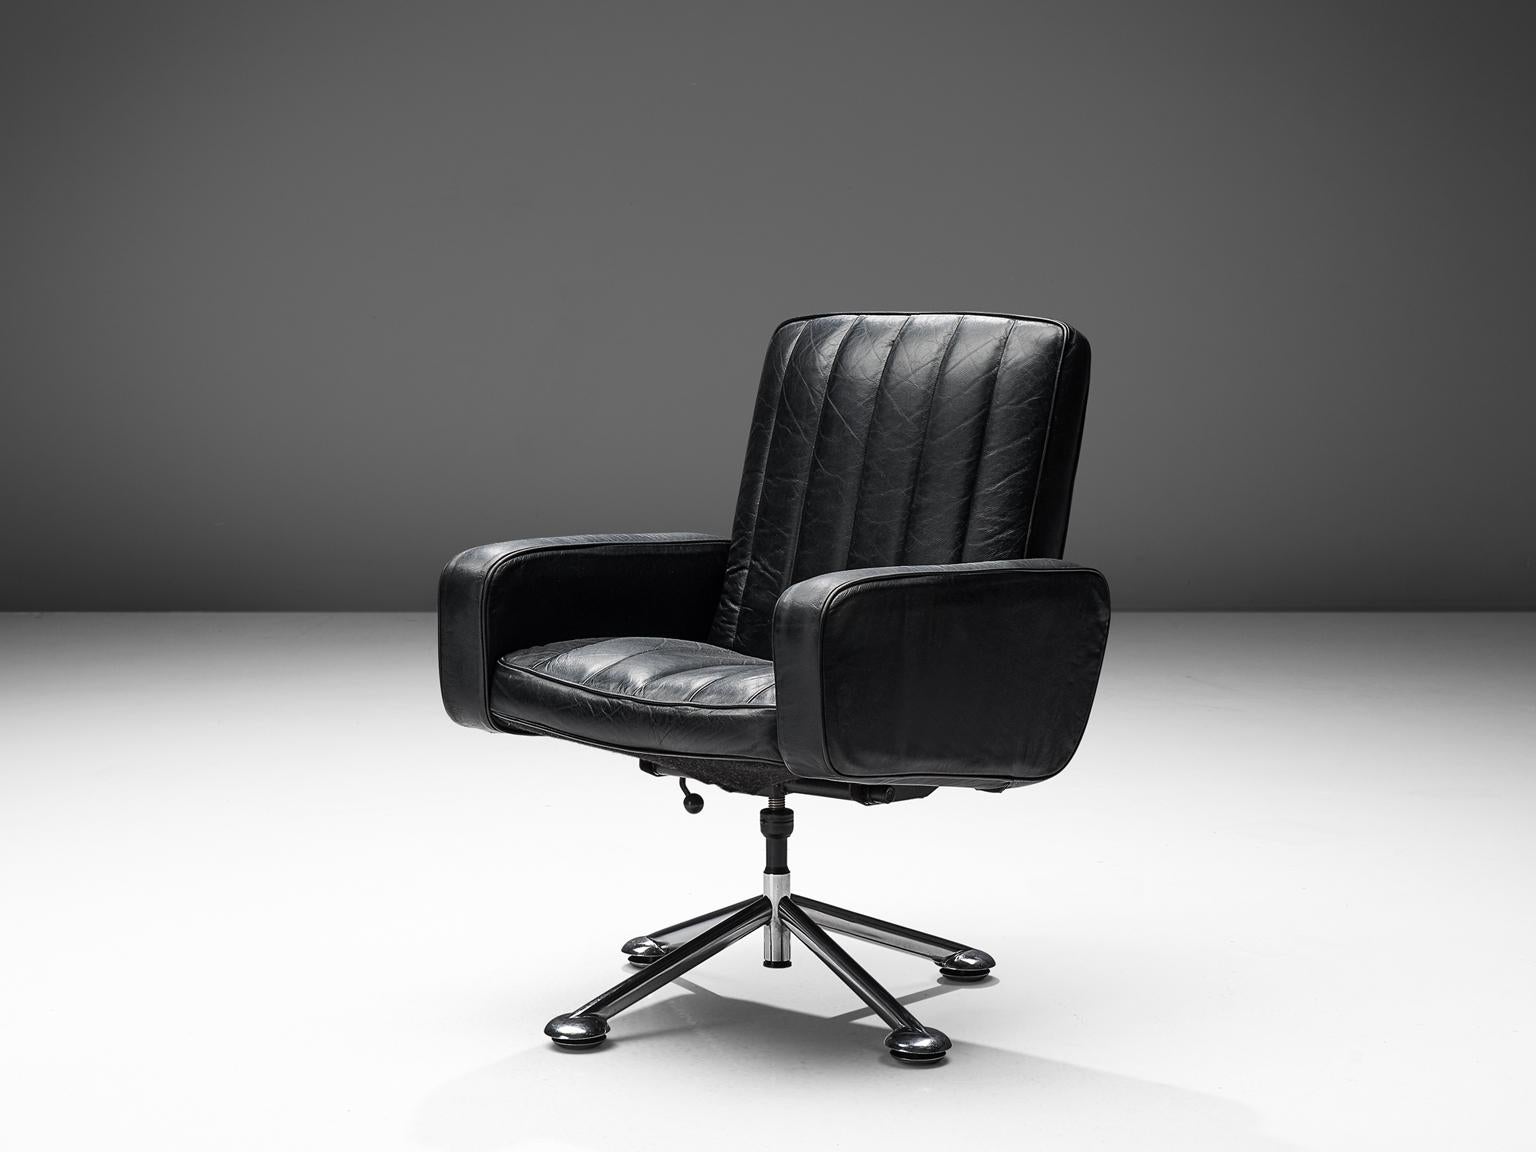 Sven Ivar Dysthe for Dokke Møbler, desk chair, black leather, steel, Norway, circa 1959. 

The base of this office chairs is made out of steel and stainless steel and the seat is made of black channeled leather. The seat is covered in their